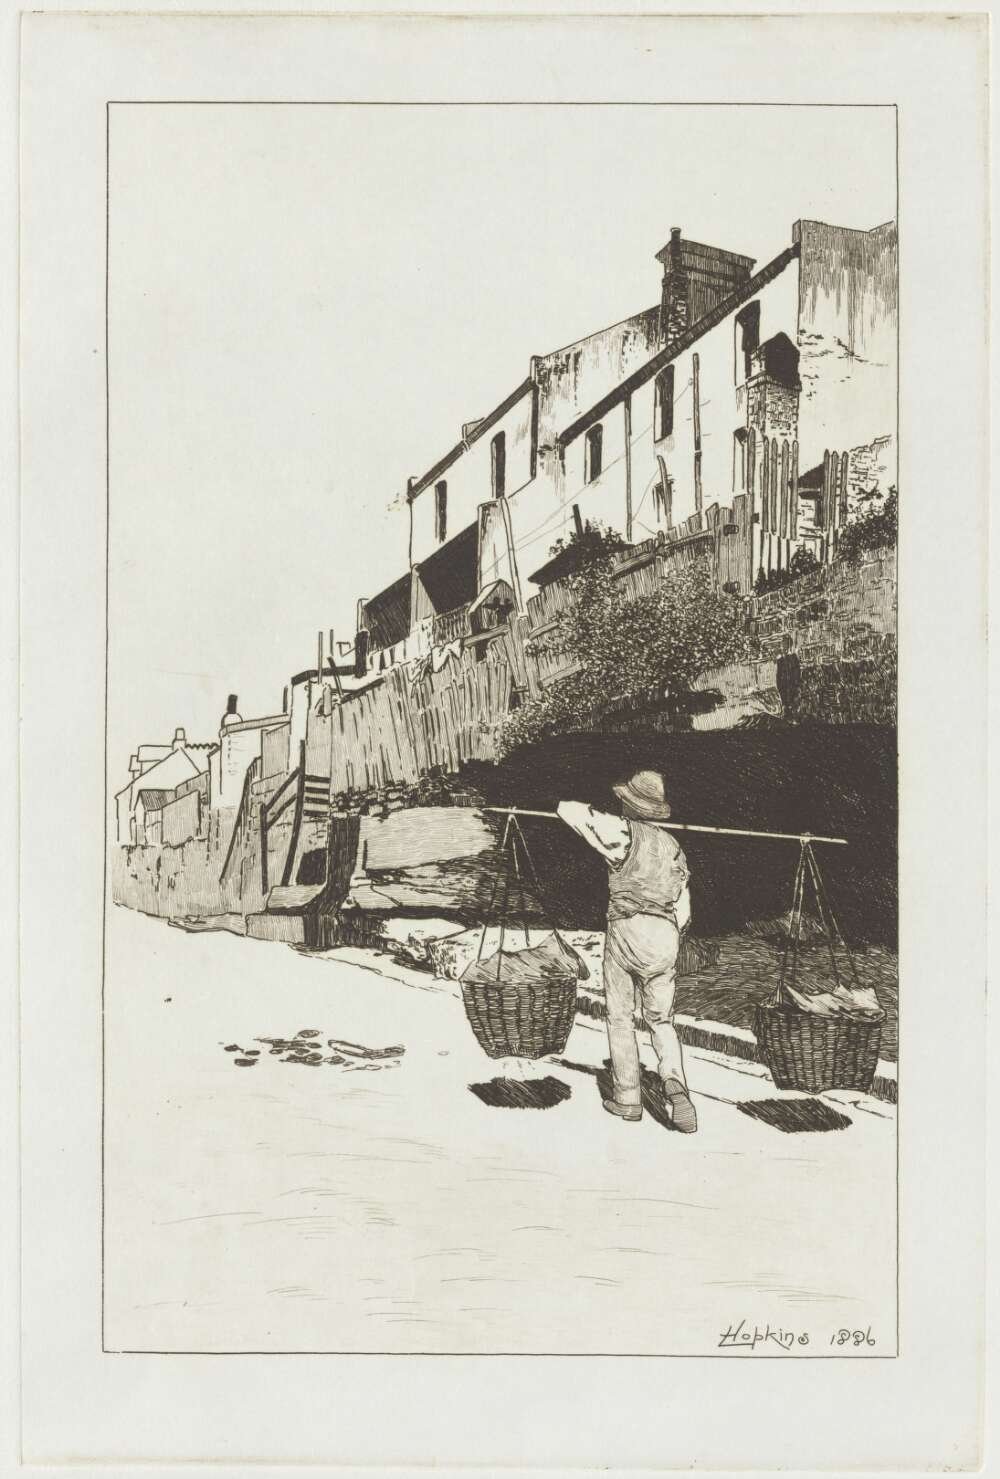 Man with a shoulder pole carrying baskets, the Rocks, Sydney, 1886 [picture] nla.cat-vn1552623 